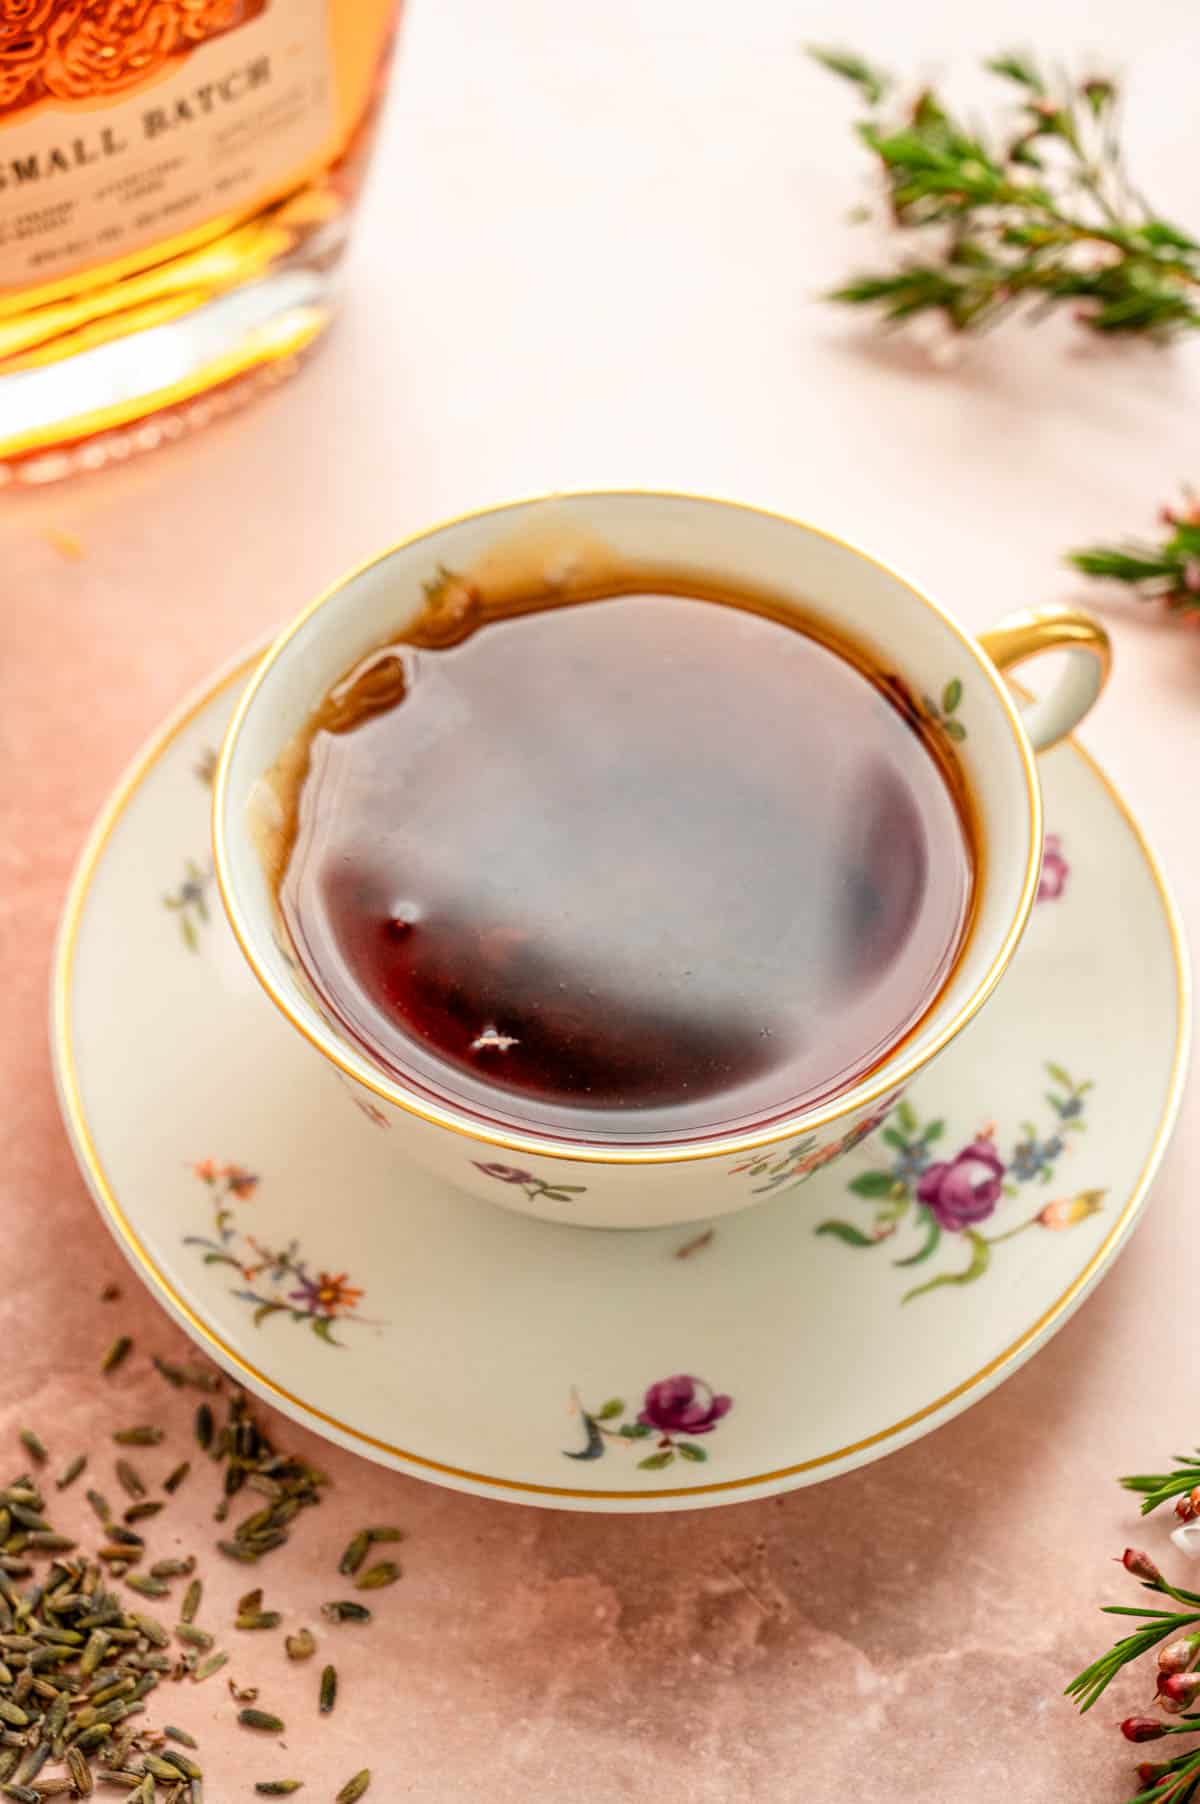 A china tea cup and saucer with filled with brewed tea.